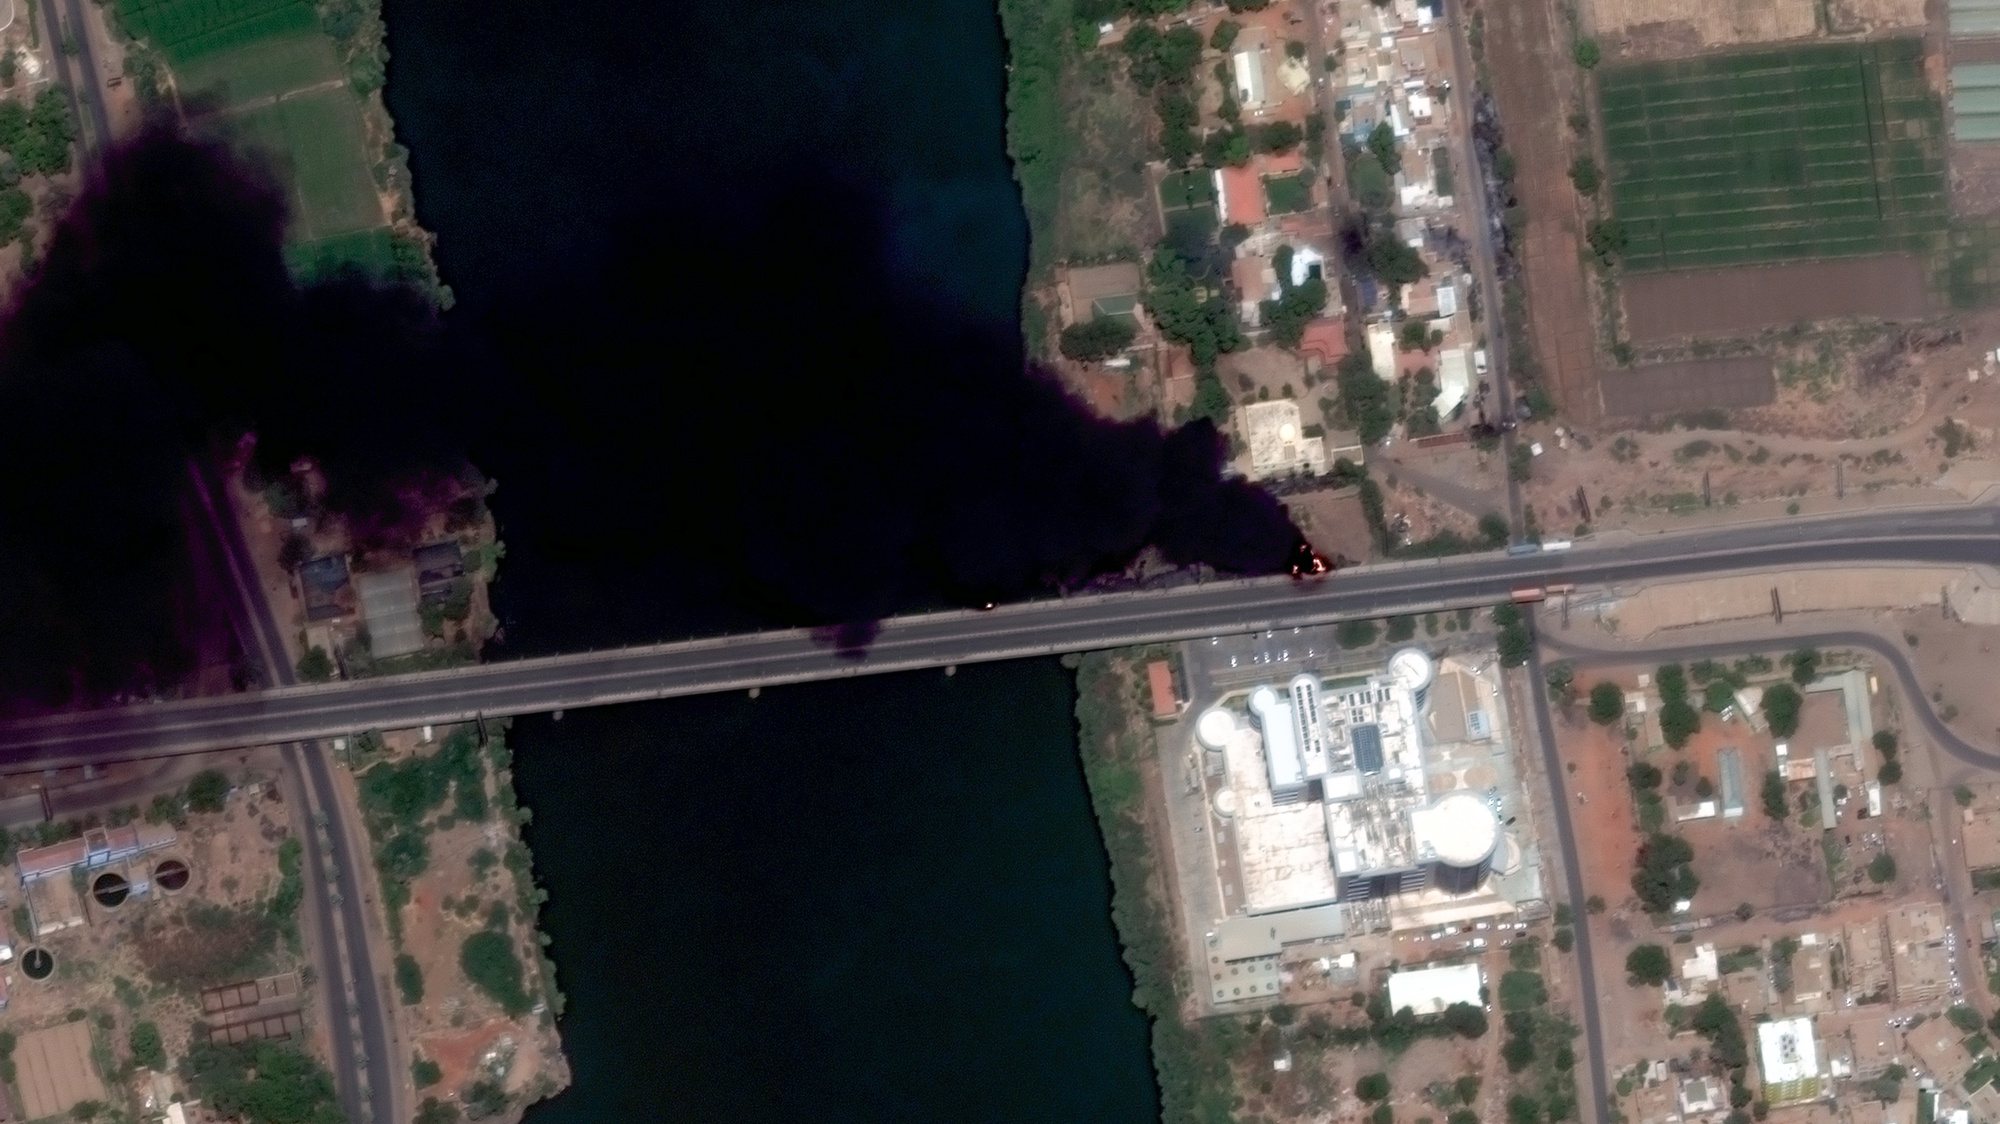 epa10576104 A handout satellite image made available by Maxar Technologies shows fires burning near a hospital in Khartoum, Sudan, 16 April 2023. Heavy gunfire and explosions were reported in Sudan&#039;s capital Khartoum on 15 April between the army and a paramilitary group following days of tension centering around the country&#039;s proposed transition to civilian rule.  EPA/MAXAR TECHNOLOGIES HANDOUT -- MANDATORY CREDIT: SATELLITE IMAGE 2023 MAXAR TECHNOLOGIES -- THE WATERMARK MAY NOT BE REMOVED/CROPPED -- HANDOUT EDITORIAL USE ONLY/NO SALES